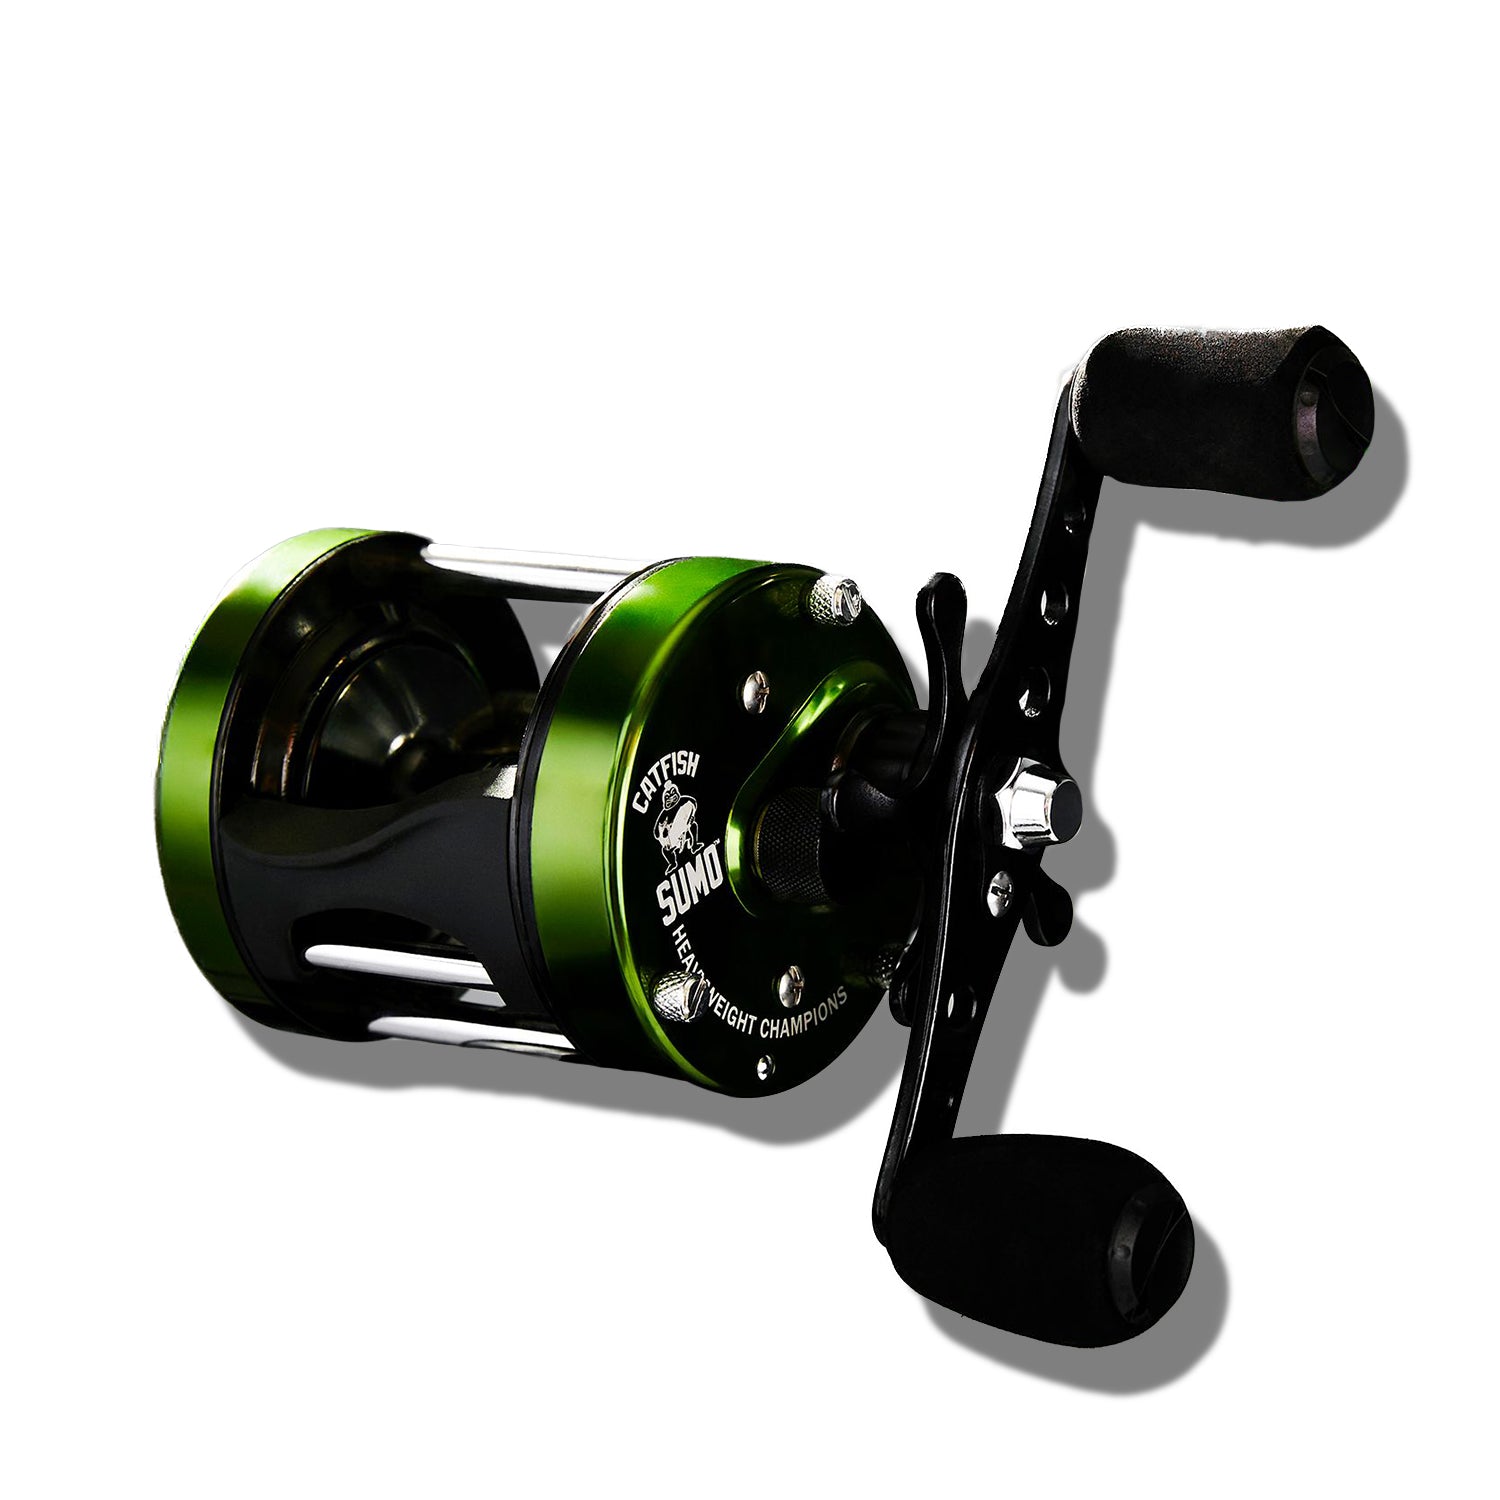 How to use a baitcaster reel for catfishing. An easy how to